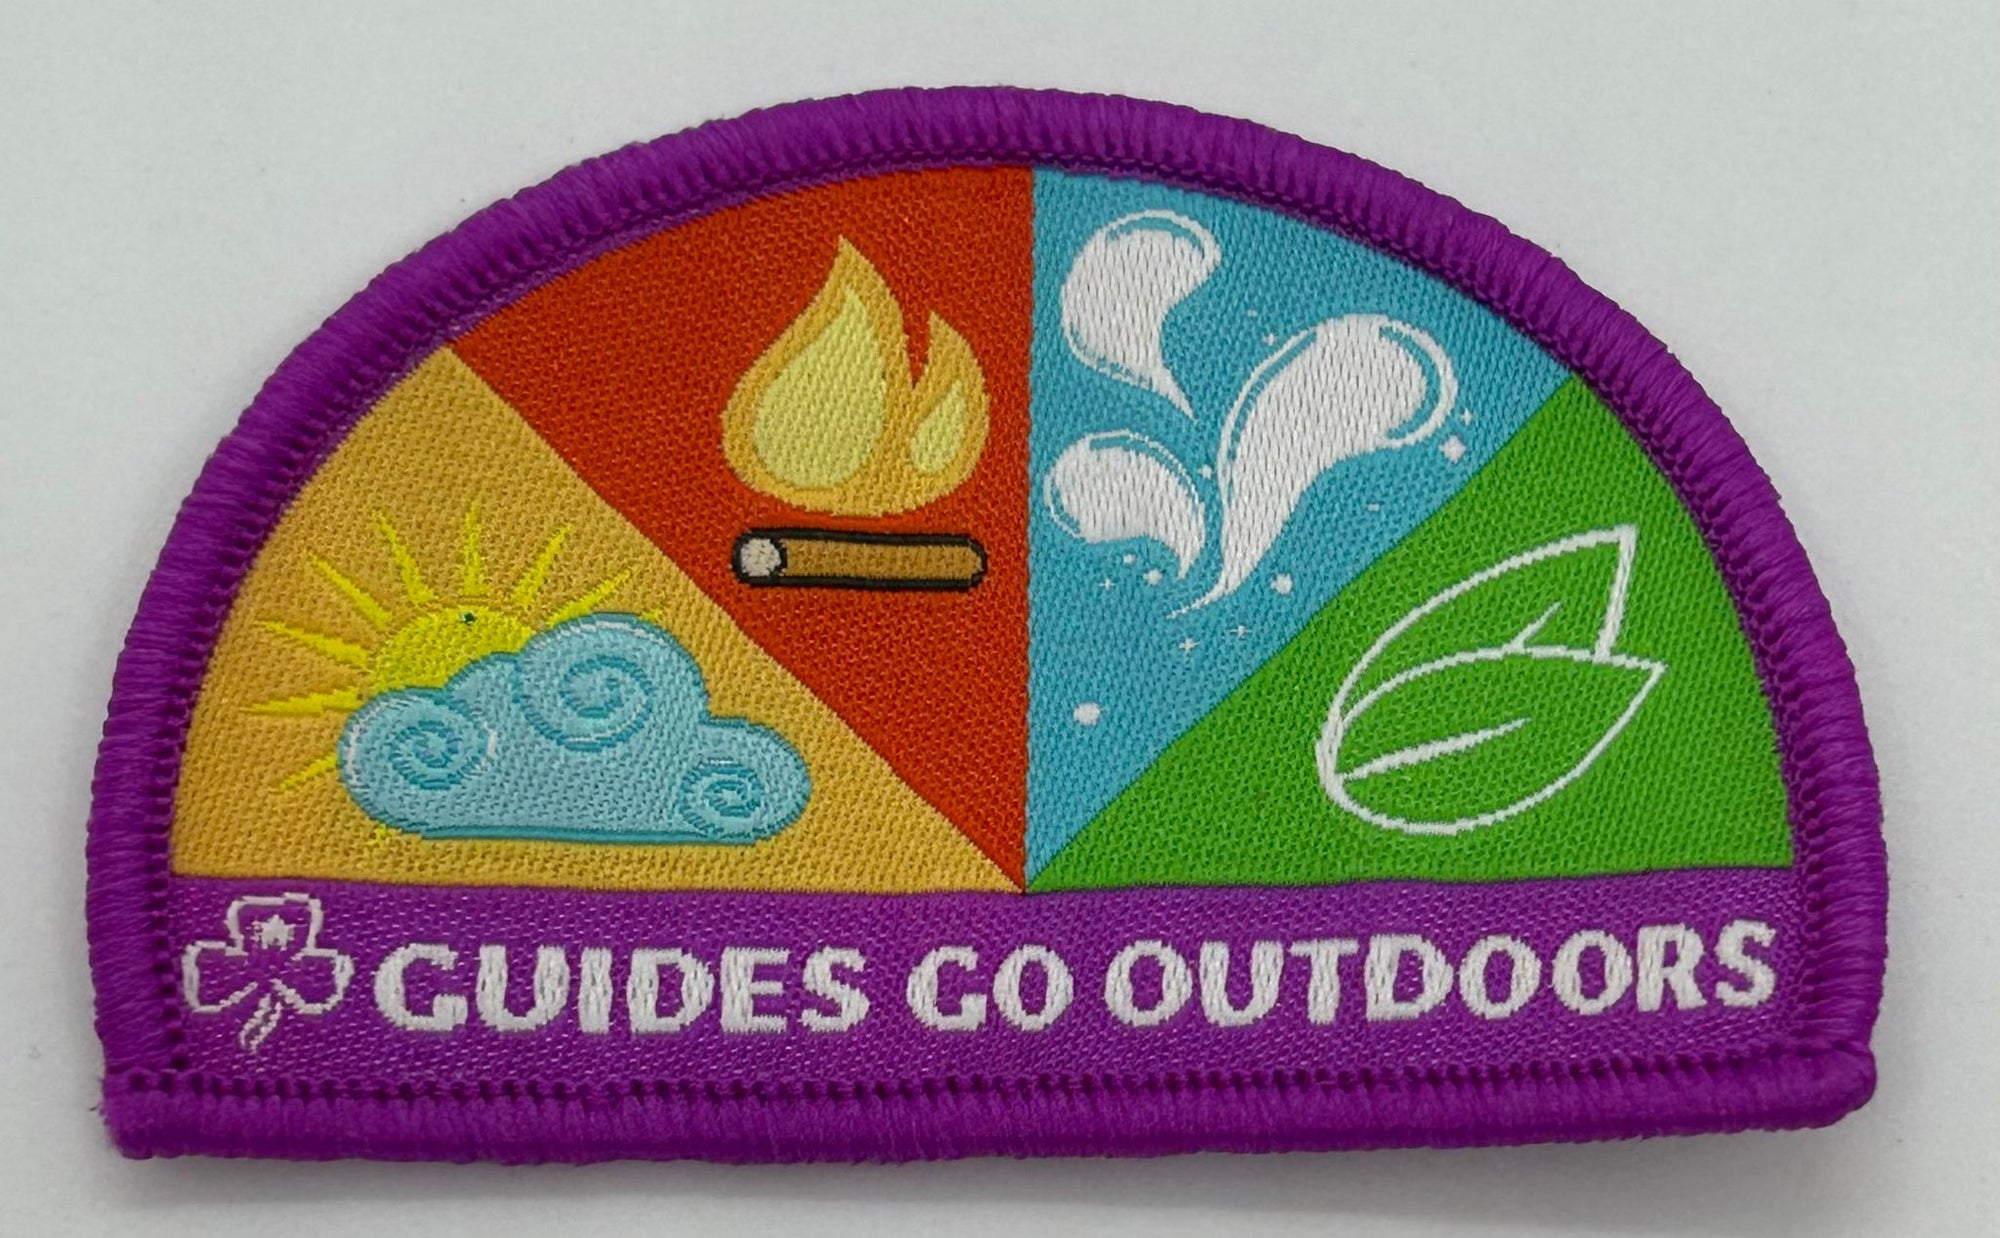 a semi circle shaped badge bound in purple that displays the elements of the syllabus on it